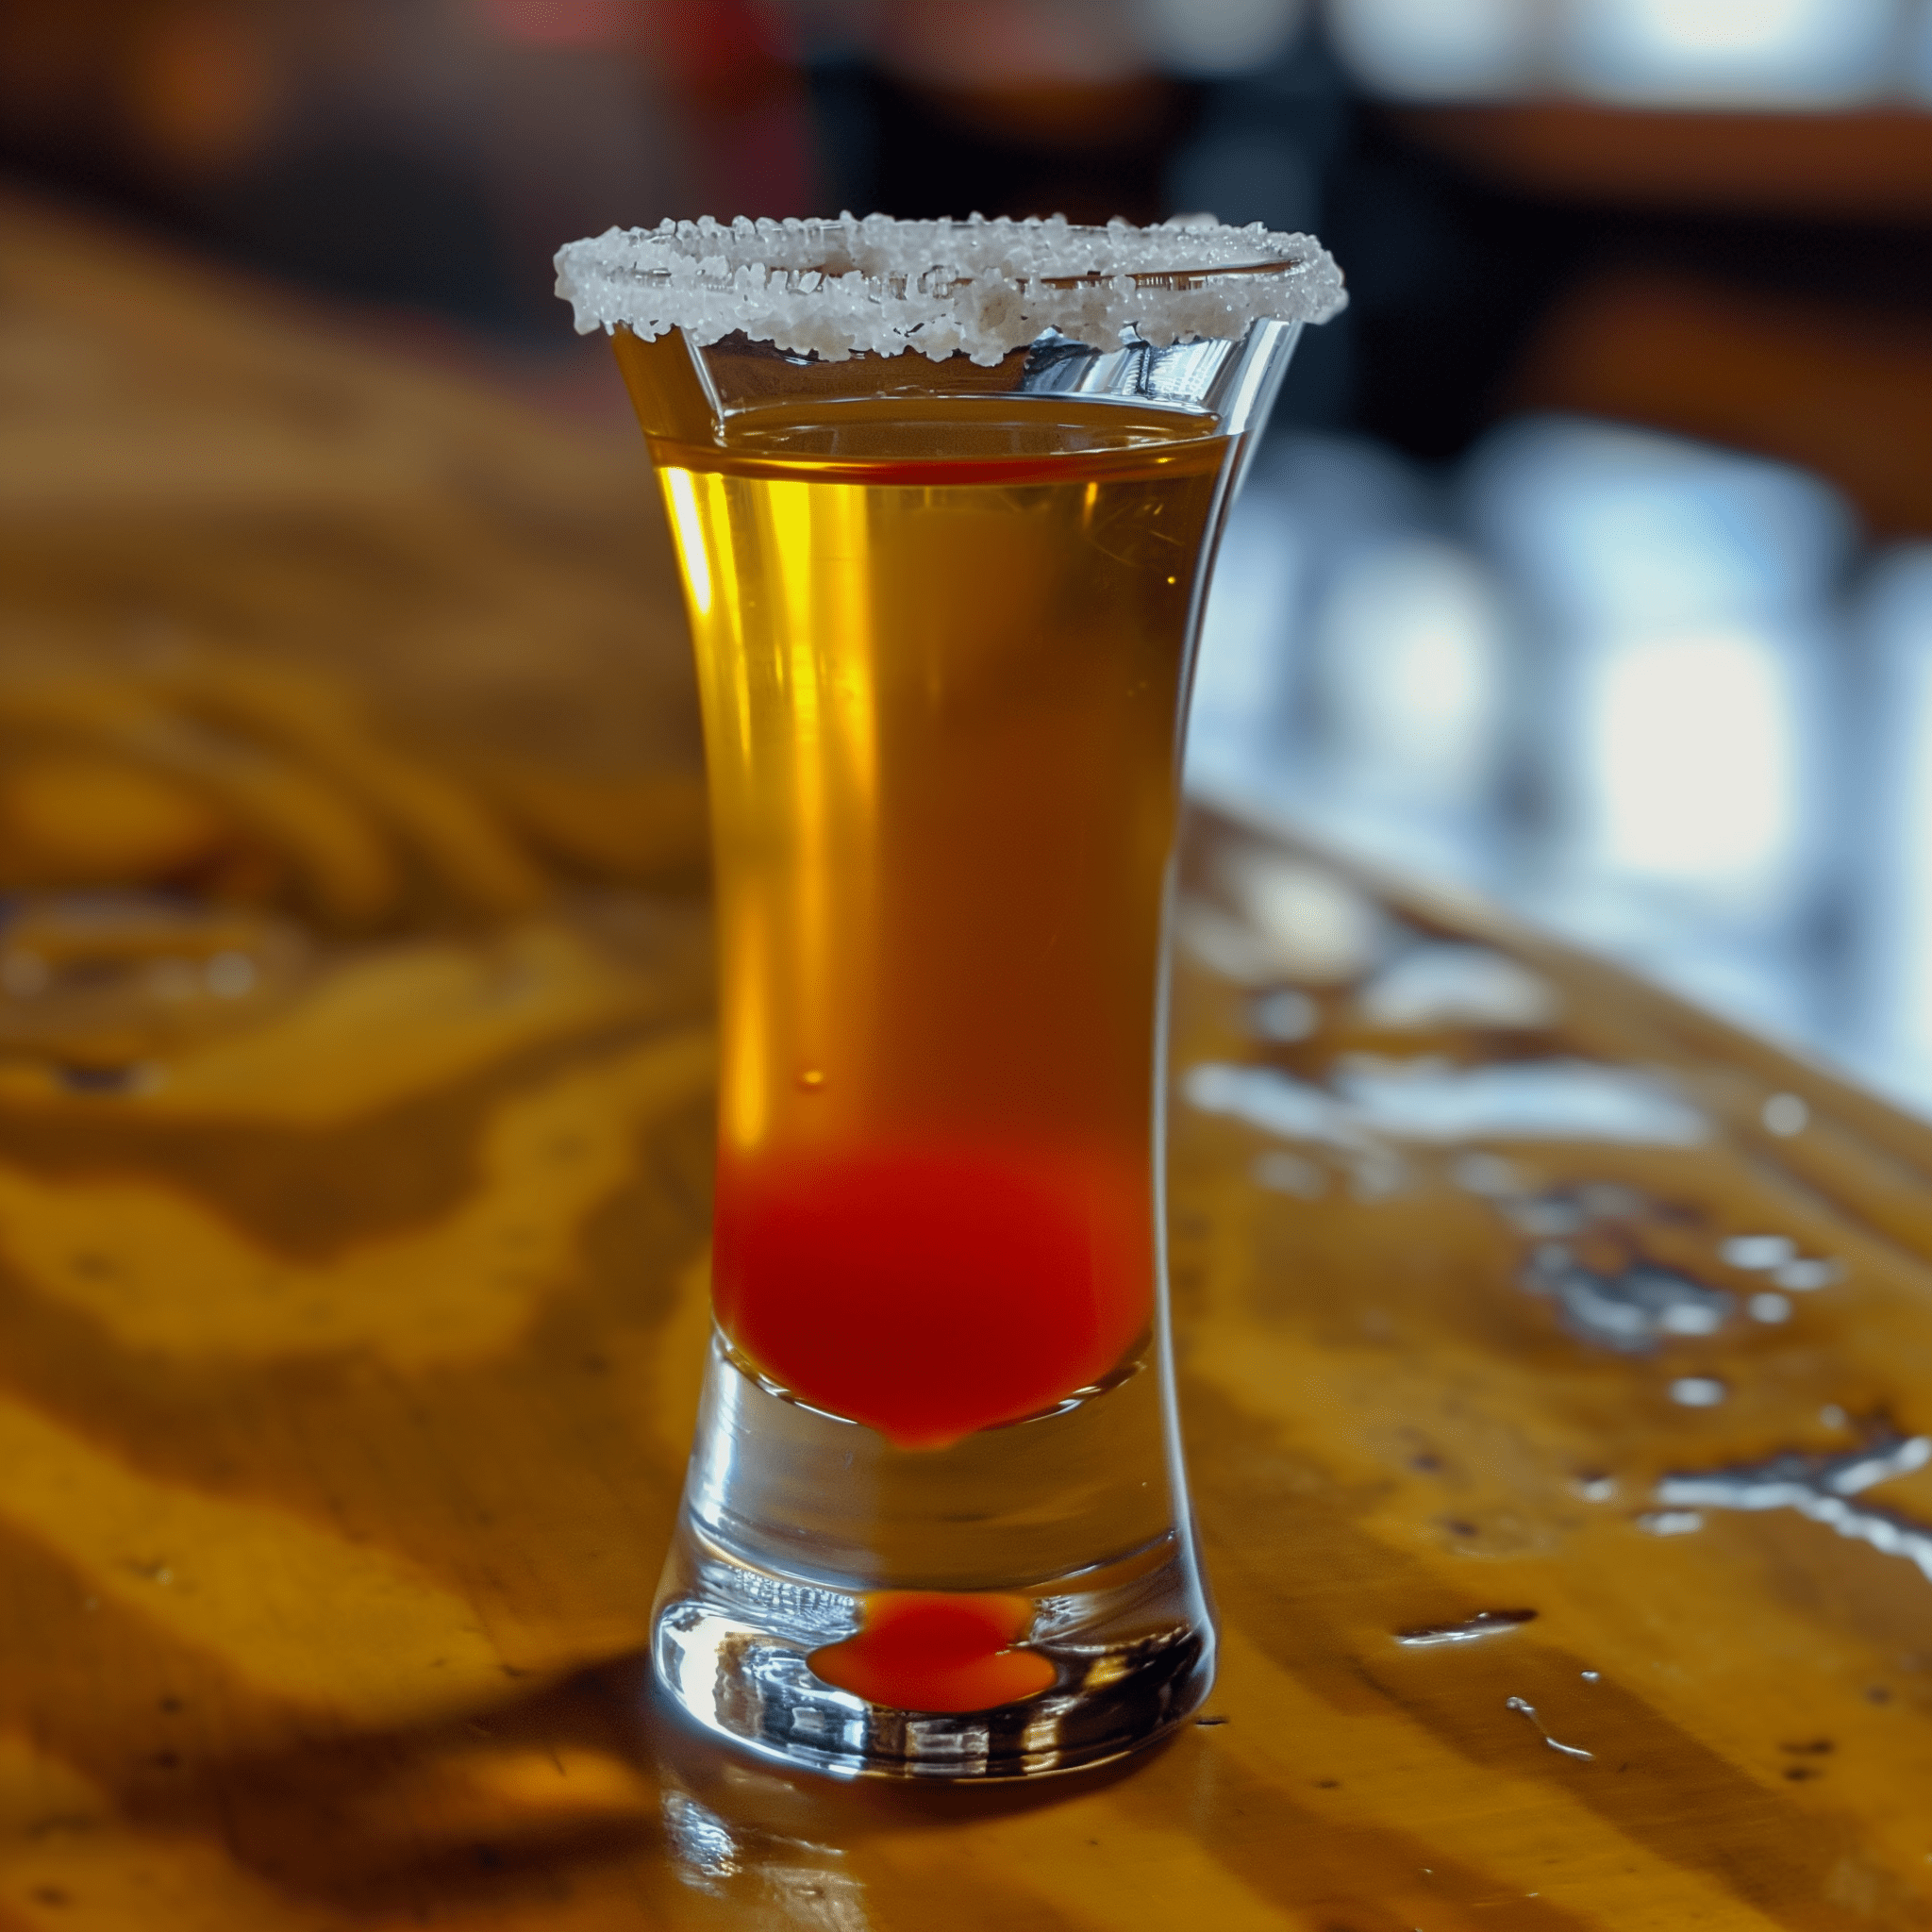 Sweaty Mexican Recipe - The Sweaty Mexican shot is a fiery blend that hits you with a spicy, peppery rush followed by the earthy undertones of tequila. It's a bold, robust shot with a lingering heat that dances on the palate.